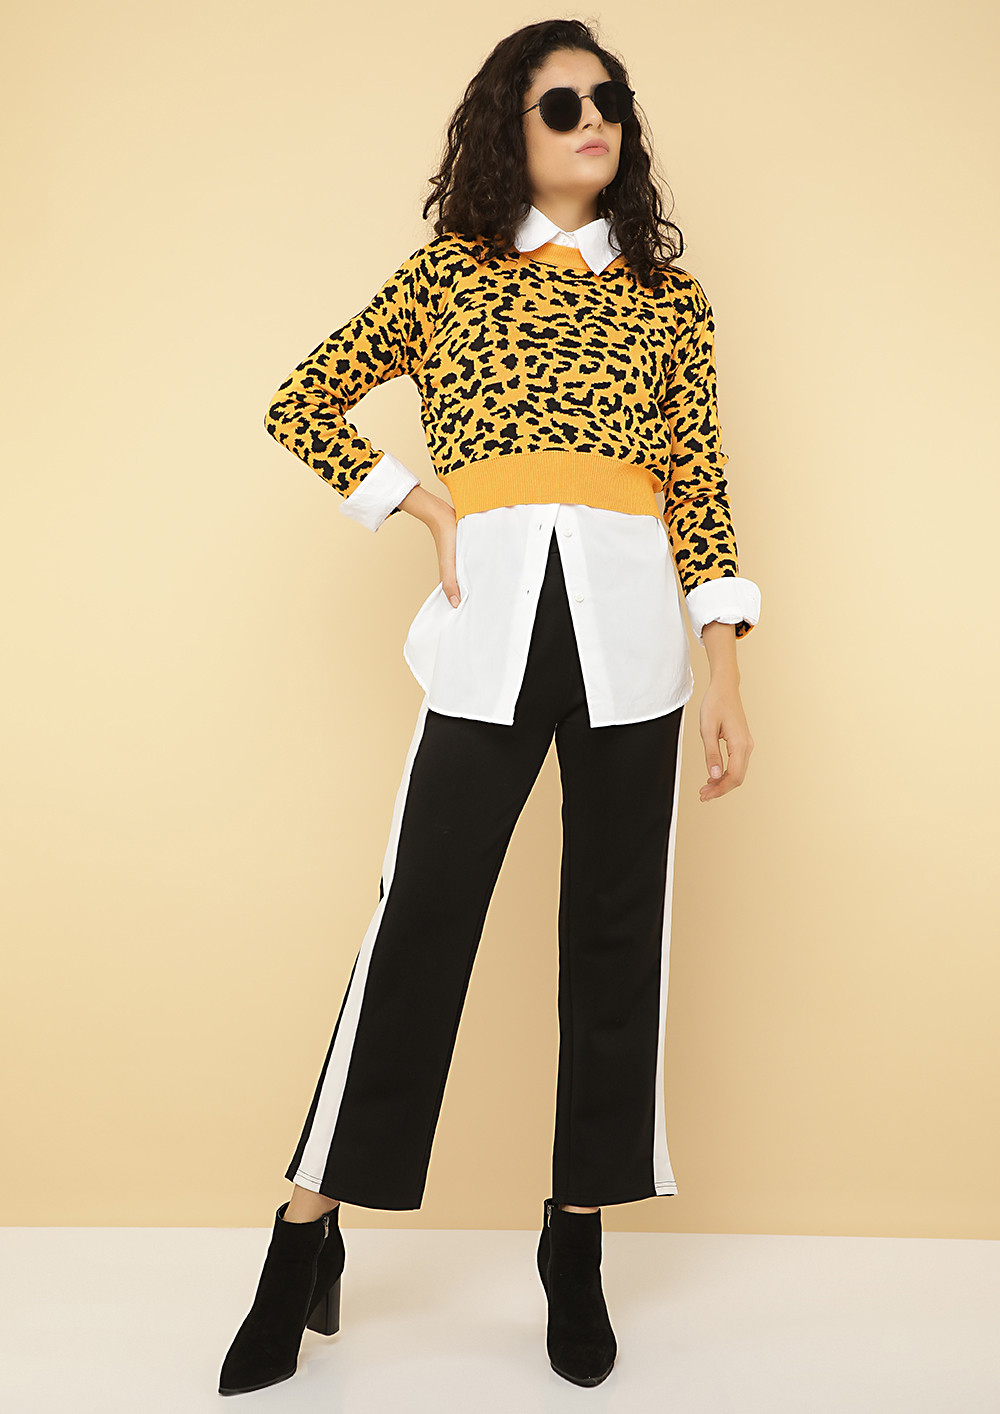 WILD AT HEART YELLOW CROPPED JUMPER